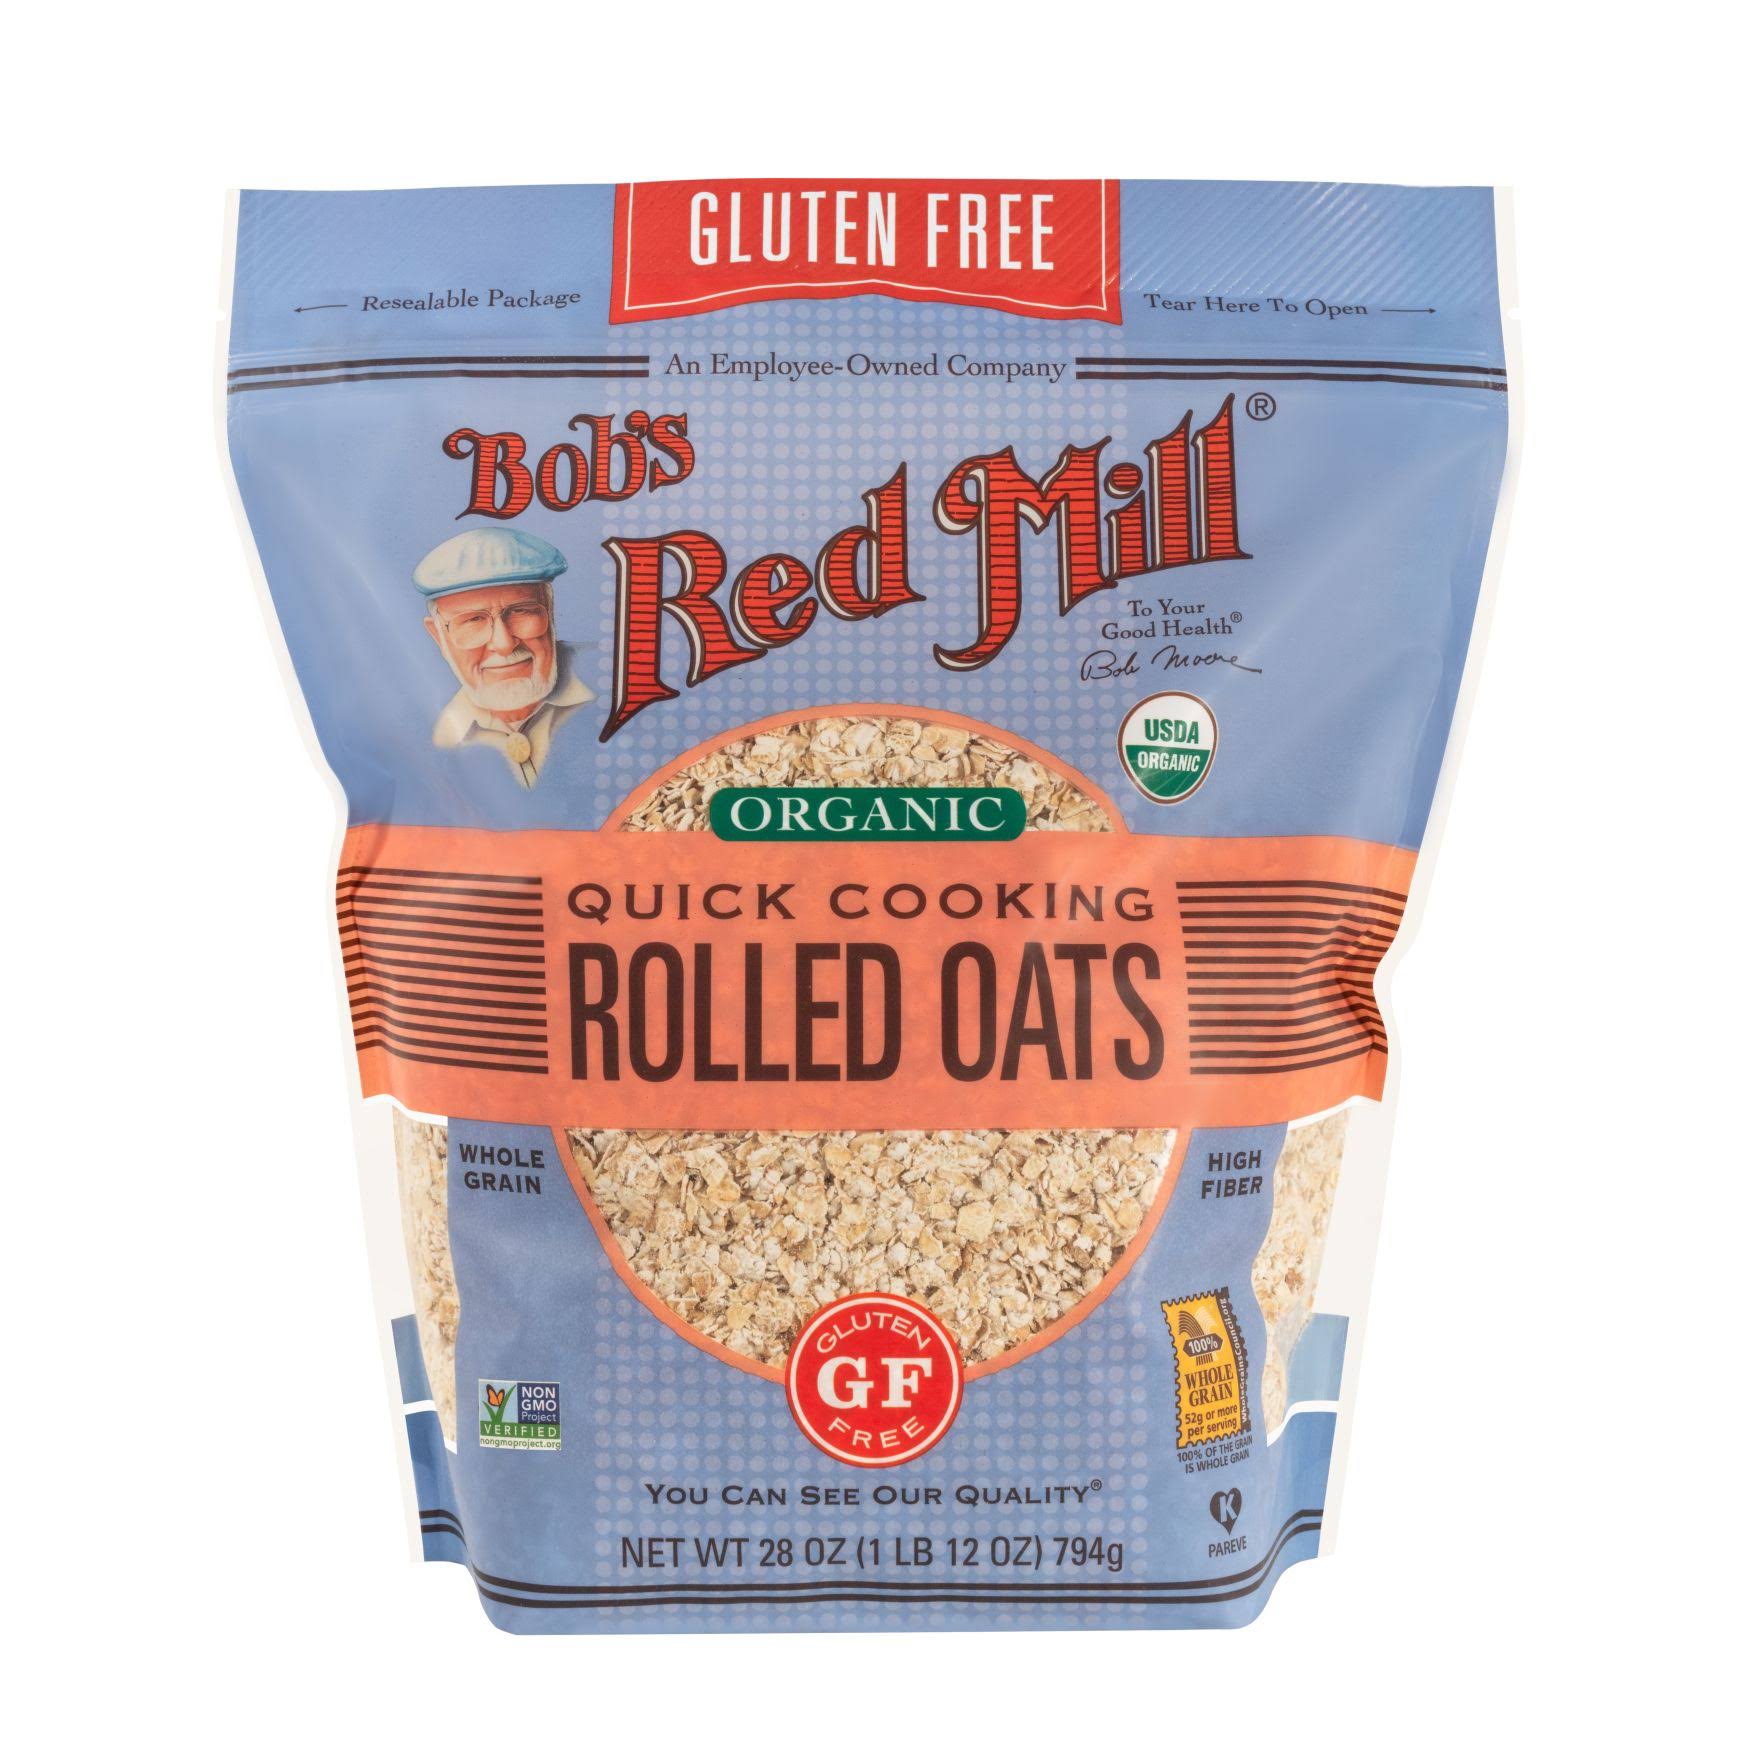 Bob's Red Mill Gluten Free Organic Quick Cooking Oats, 28-ounce